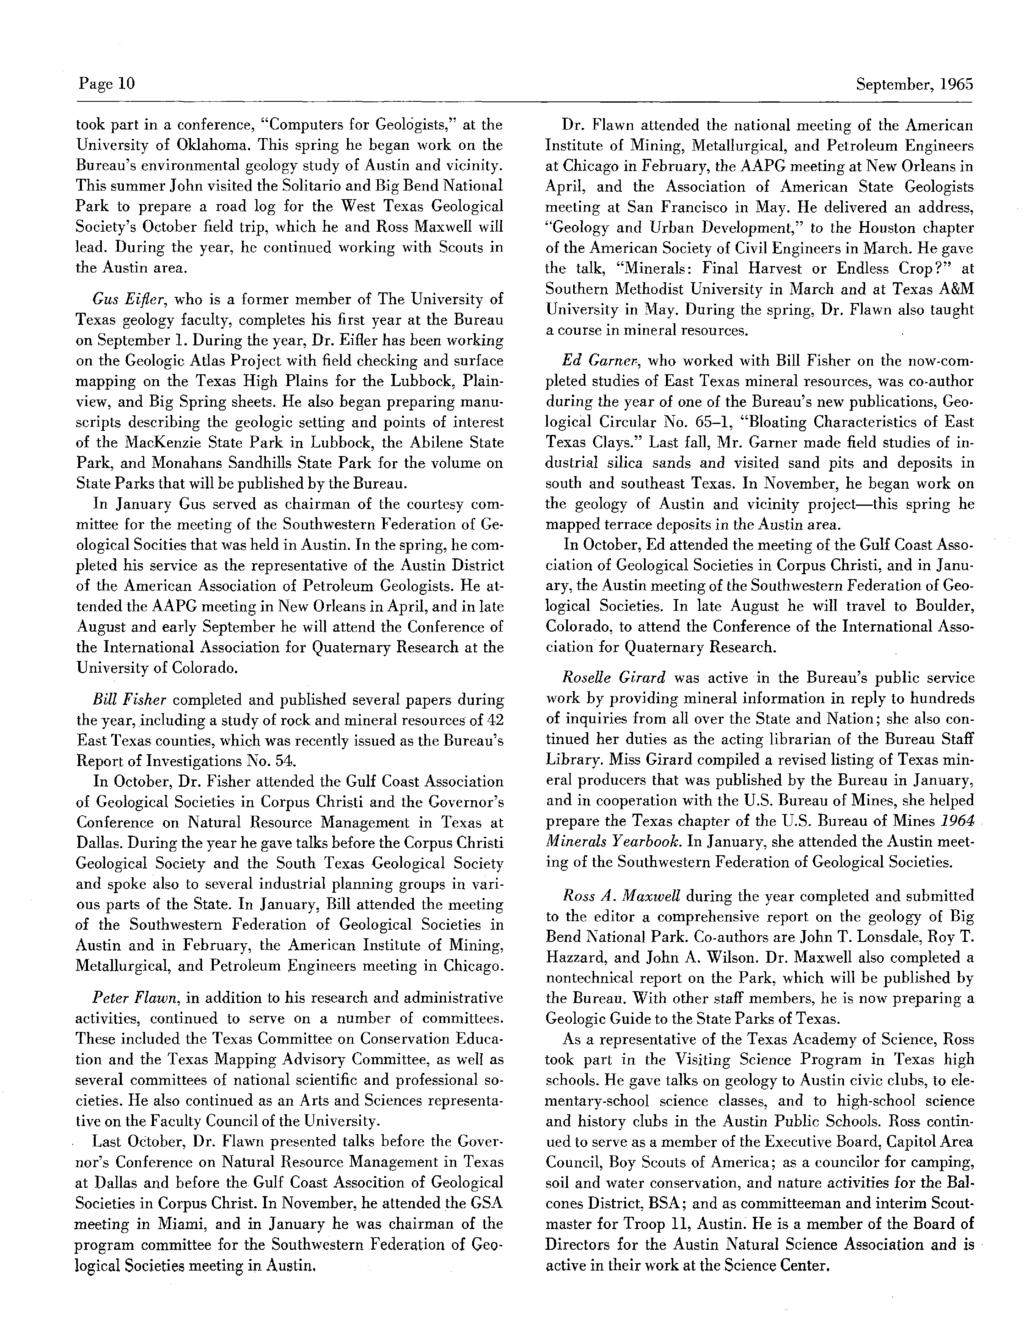 Page 10 September,1965 took part in a conference, "Computers for Geologists," at the University of Oklahoma.